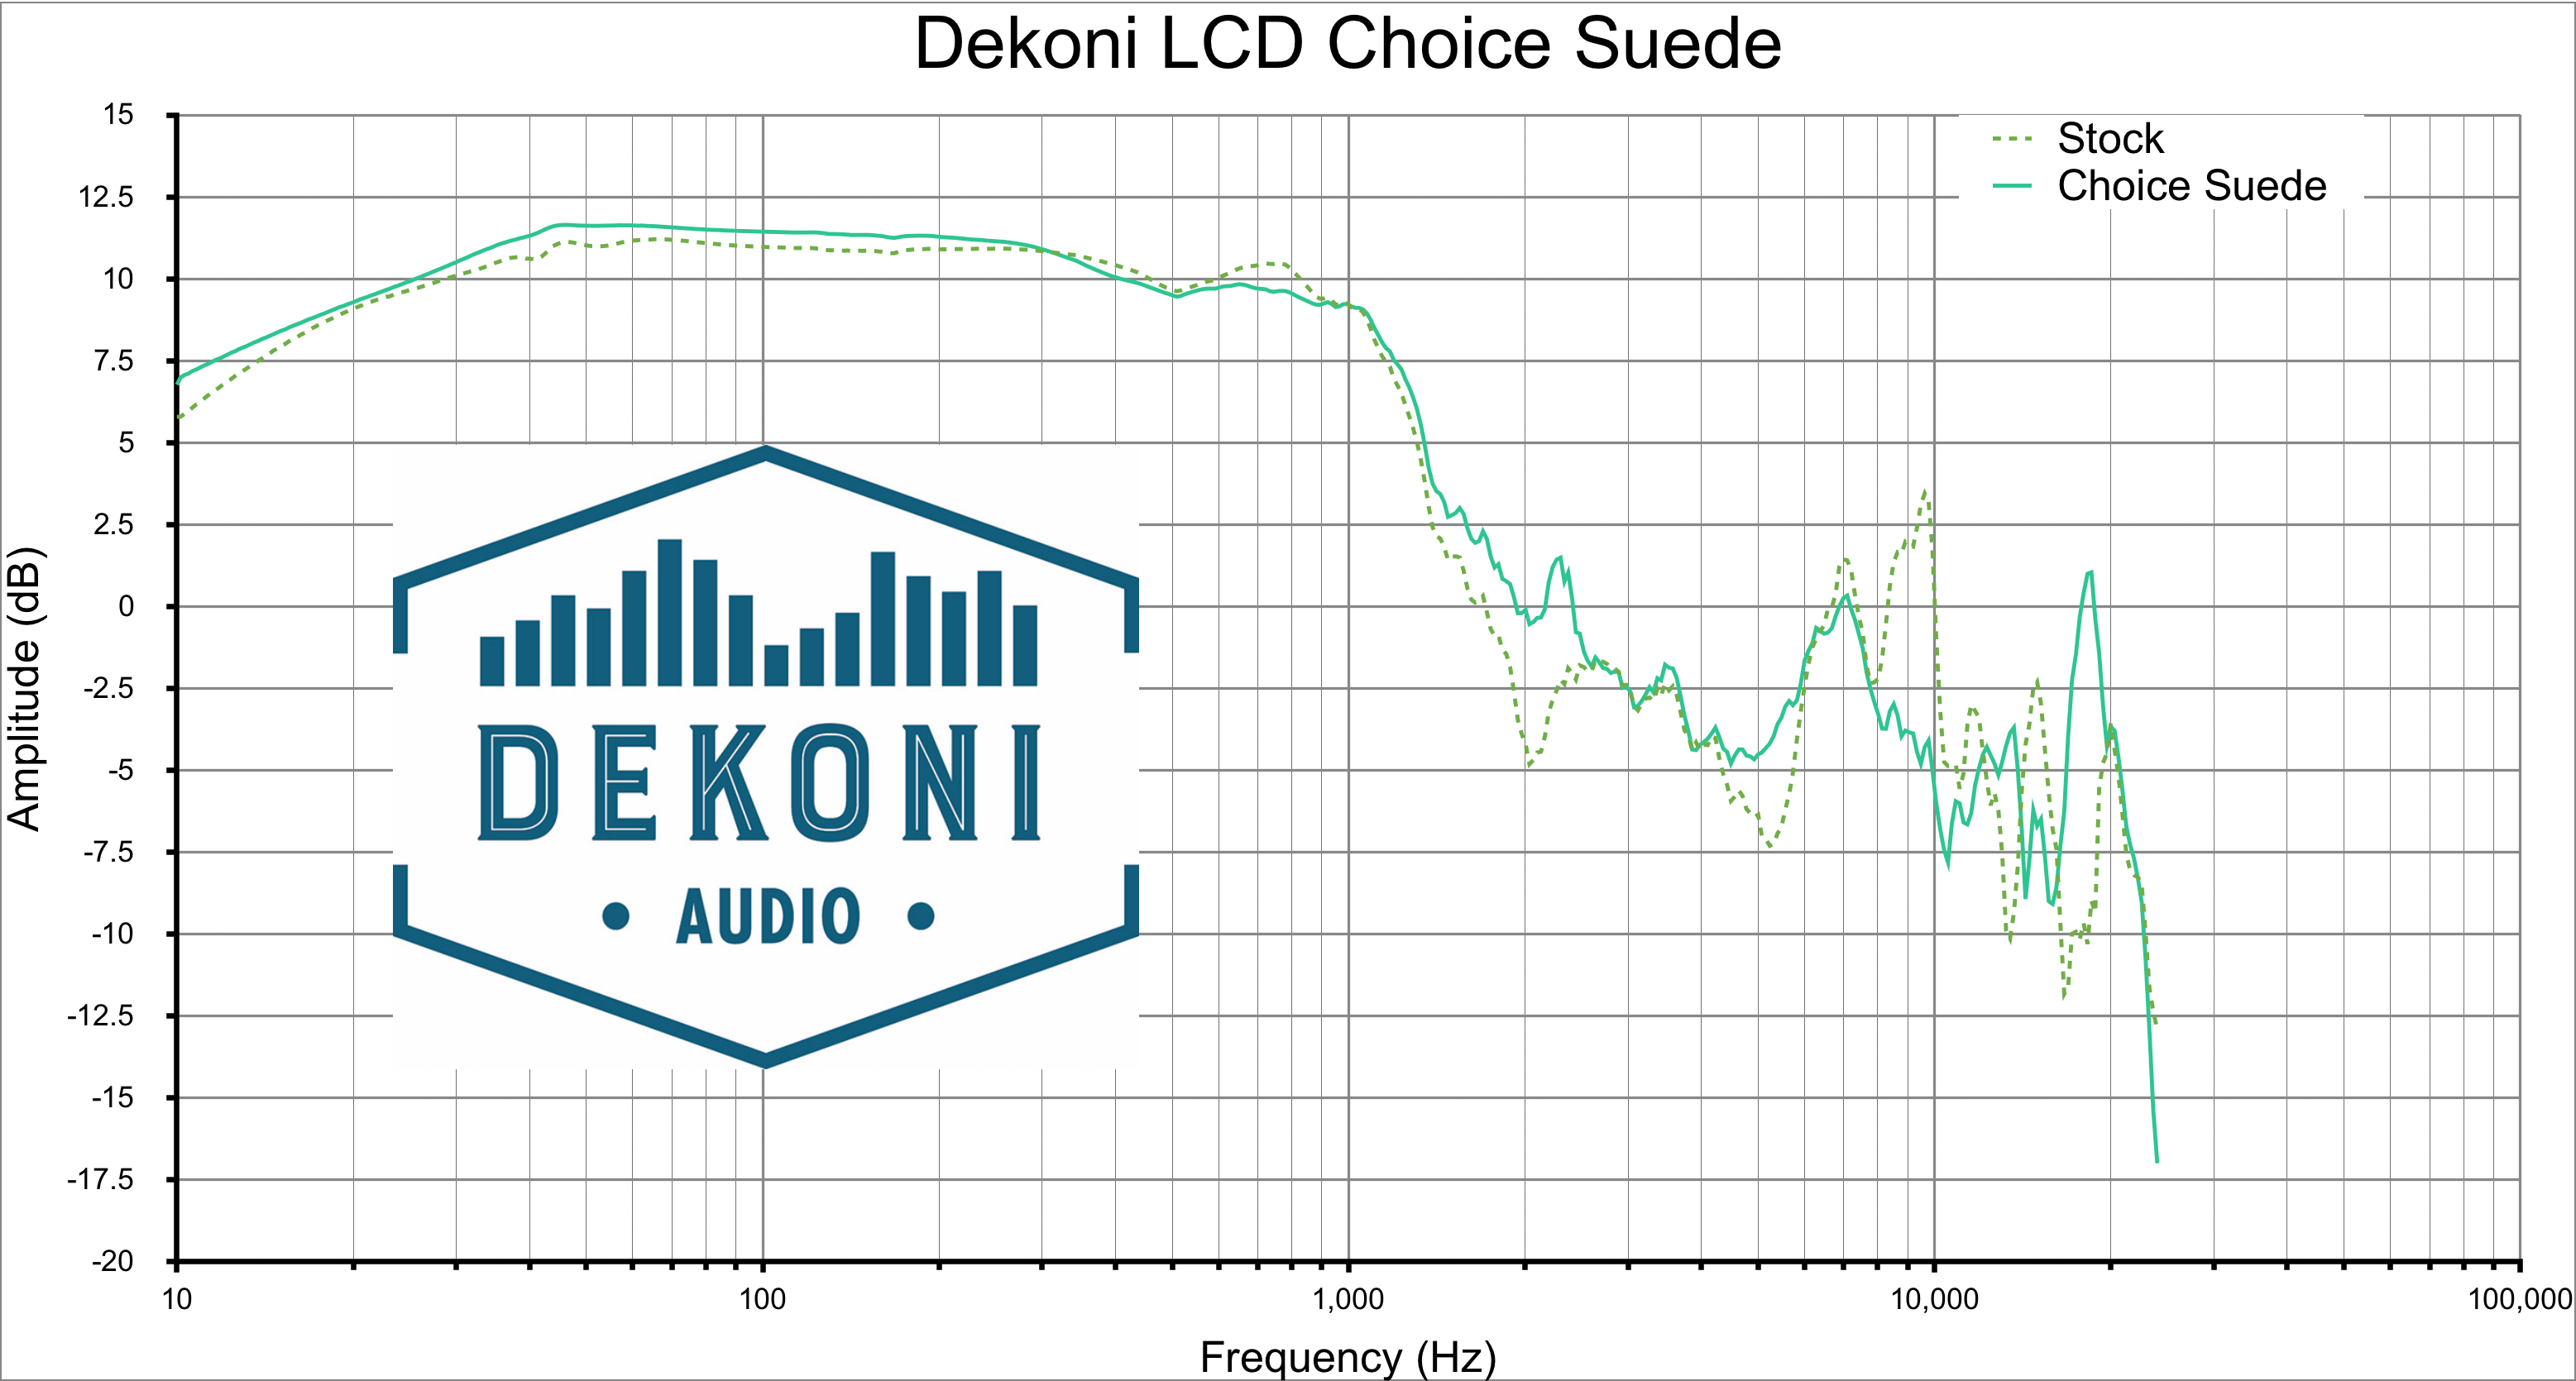 LCD Choice Suede